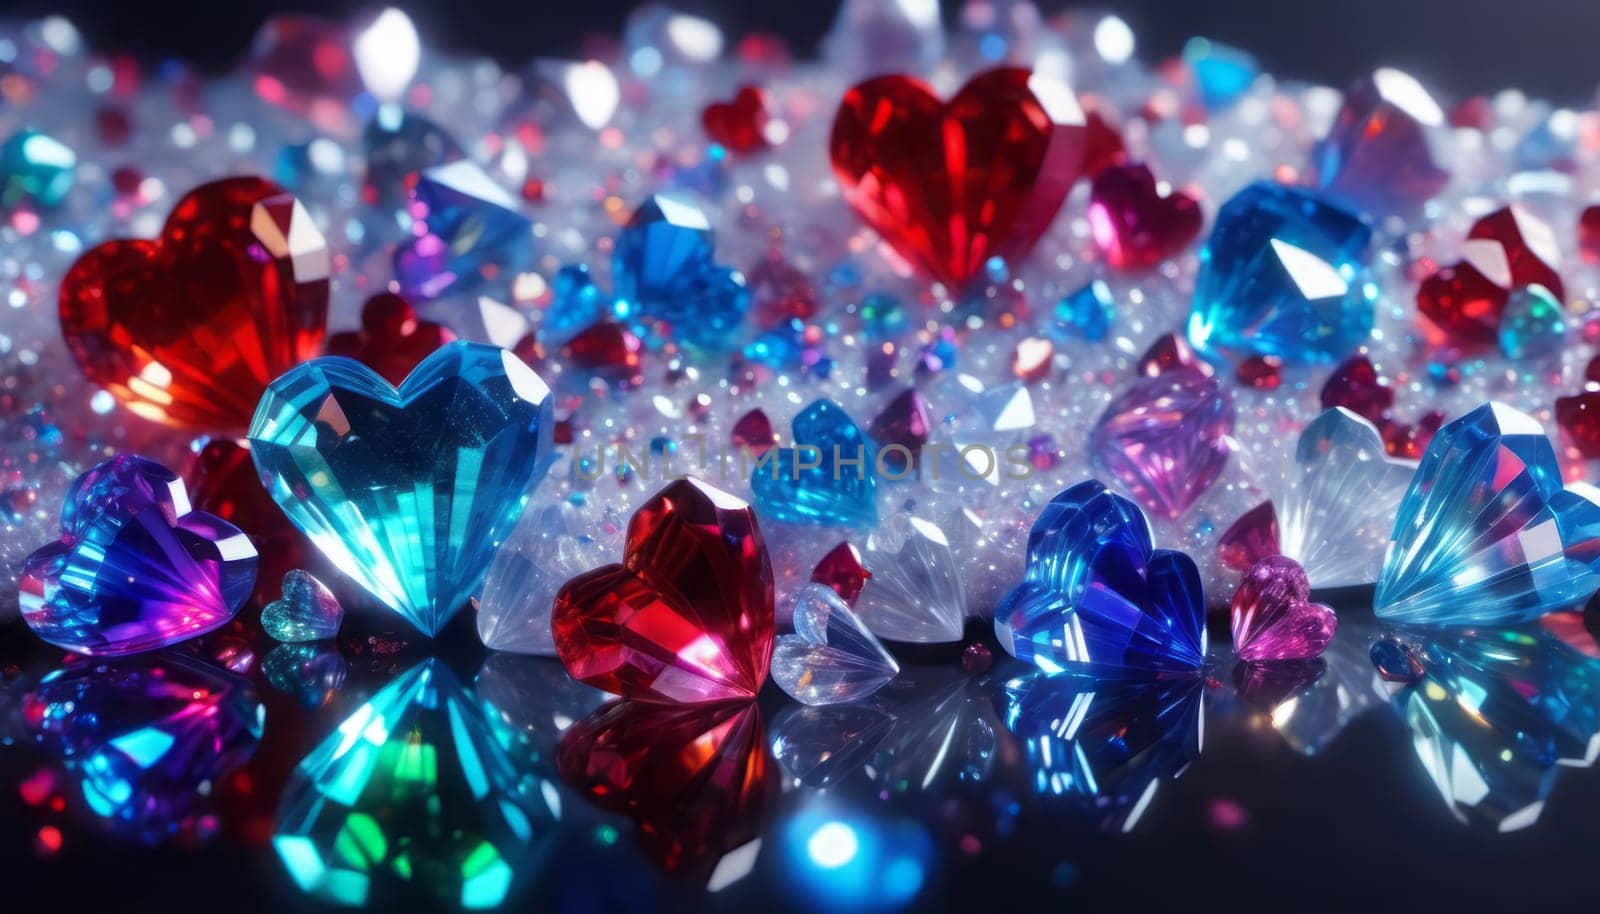 crystal's, translucent, transparent, close-up with deep depth of field Valentine's realistic detailed Light background, different little ones sizes hearts, transparent colors of the rainbow hearts, against a transparent scattering crystals, falling crystals, highlights, glints, reflections off glass